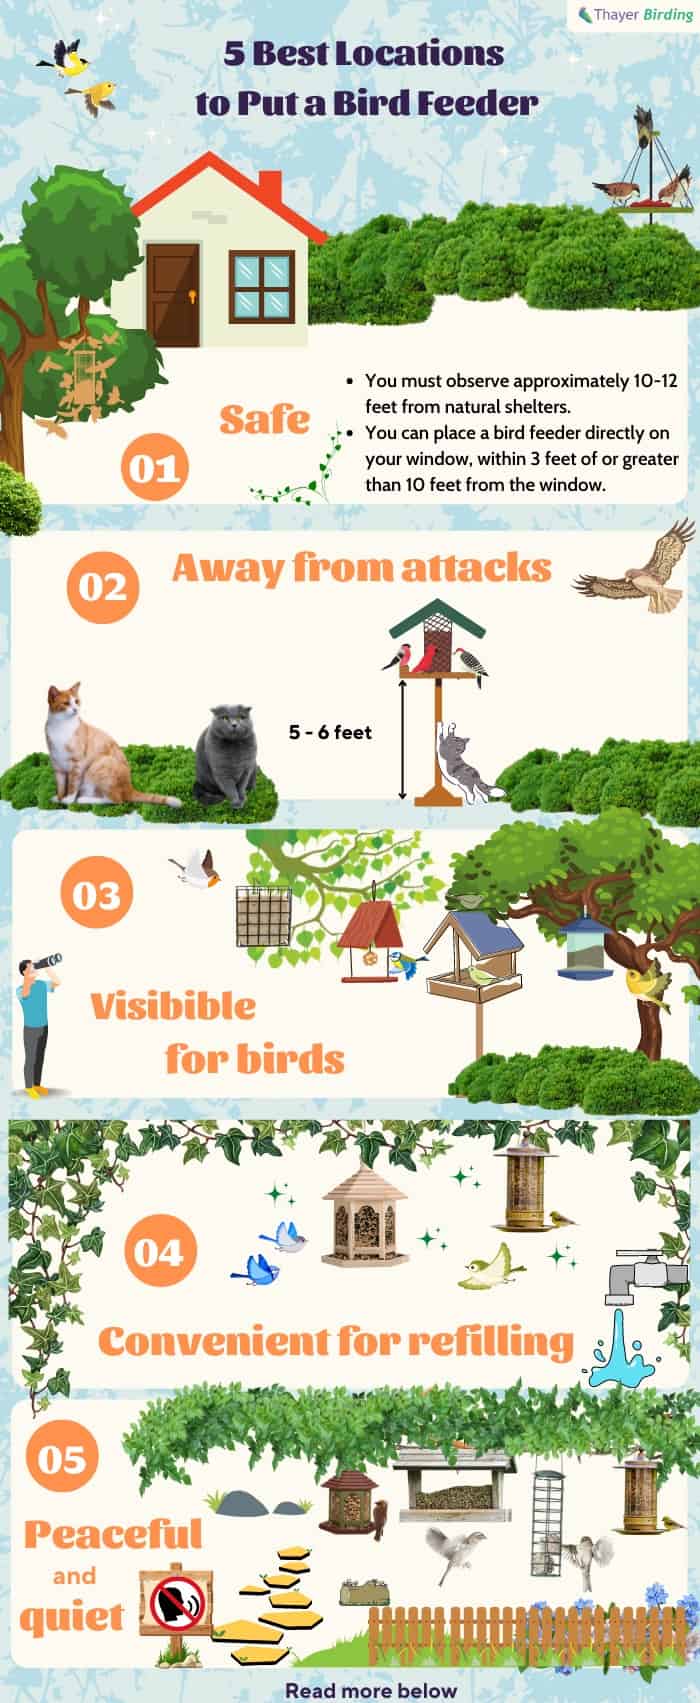 bird-feeders-be-close-to-the-house